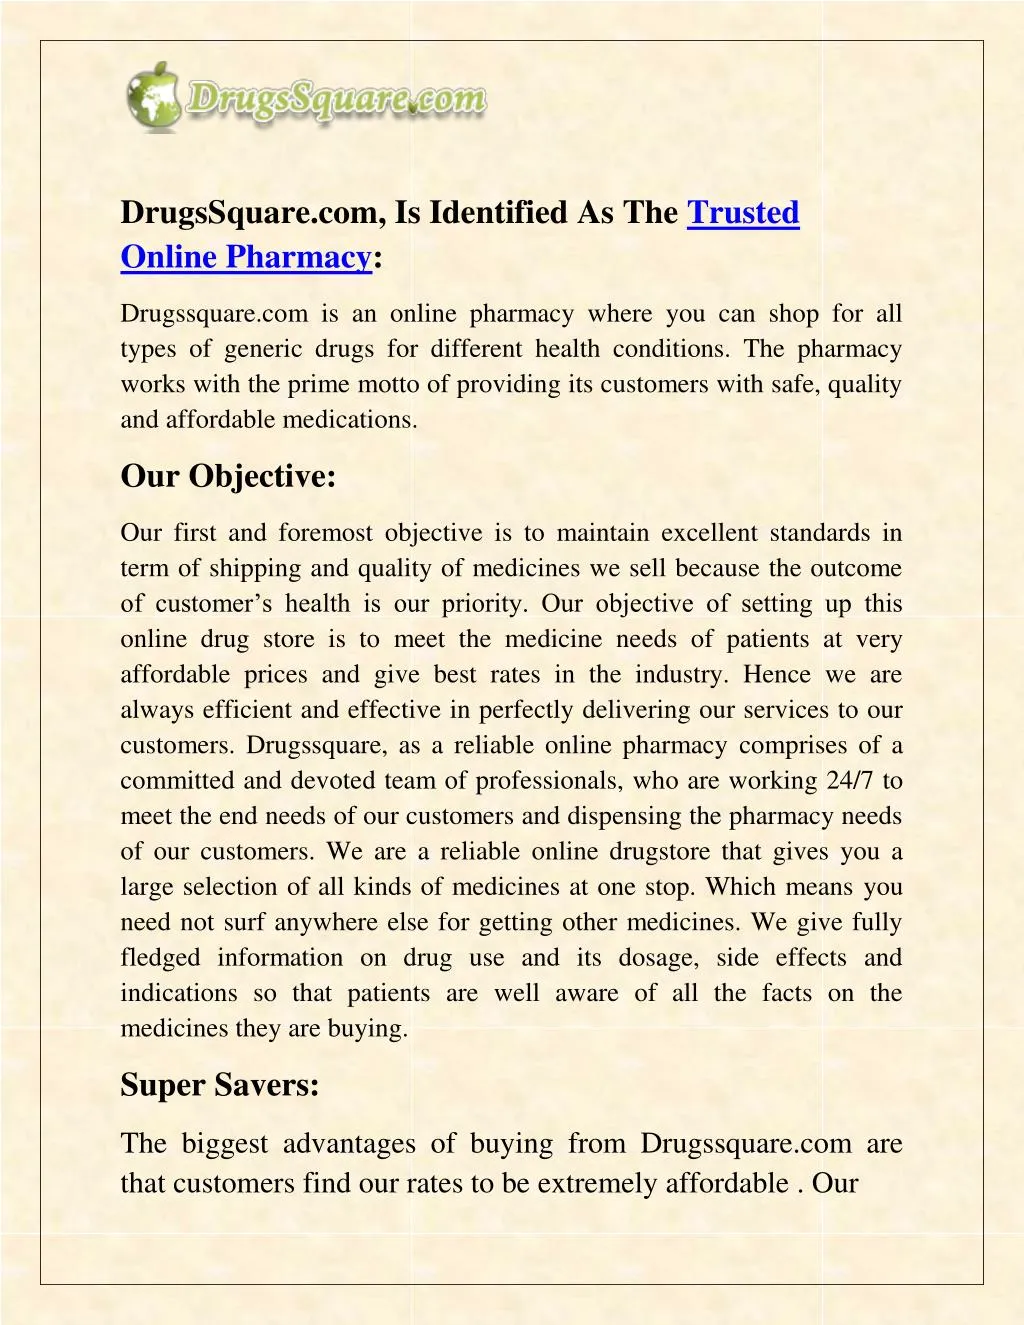 drugssquare com is identified as the trusted